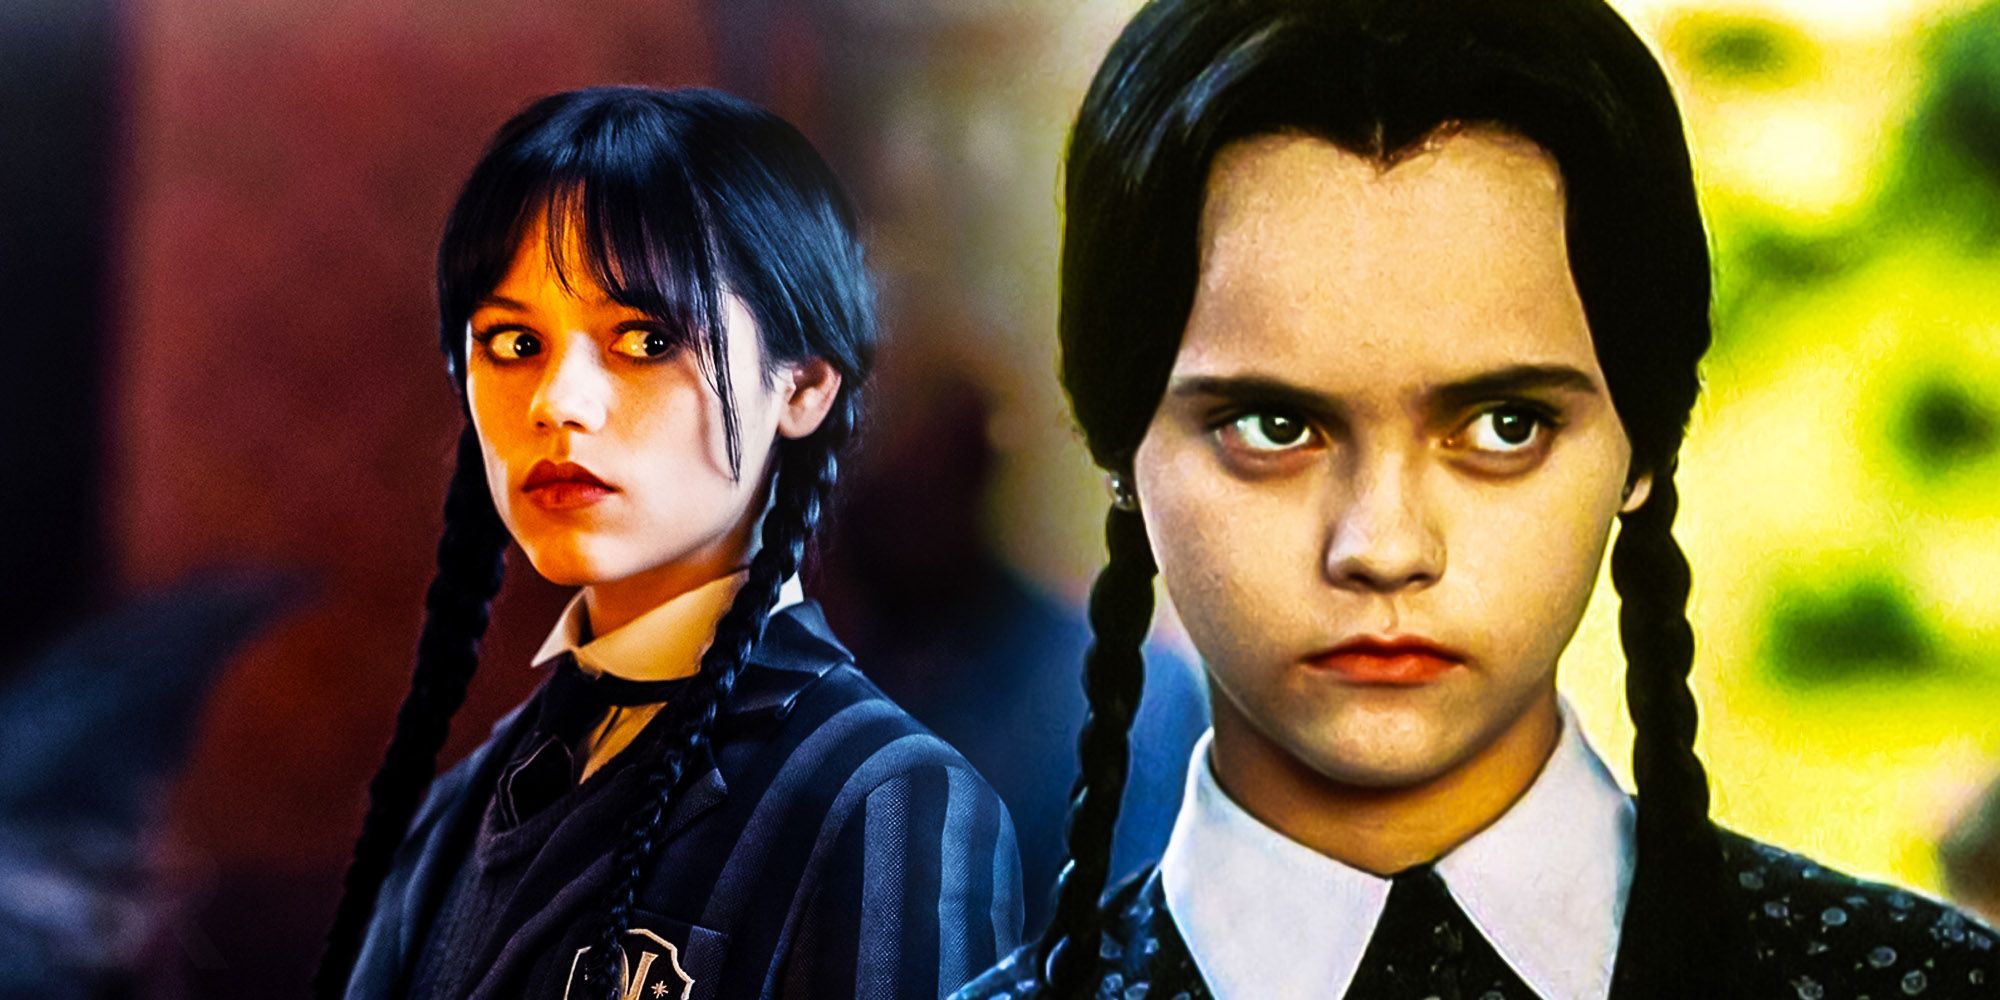 Jenna Ortega's Wednesday in the Netflix show and Christina Ricci's Wednesday in the Addams Family